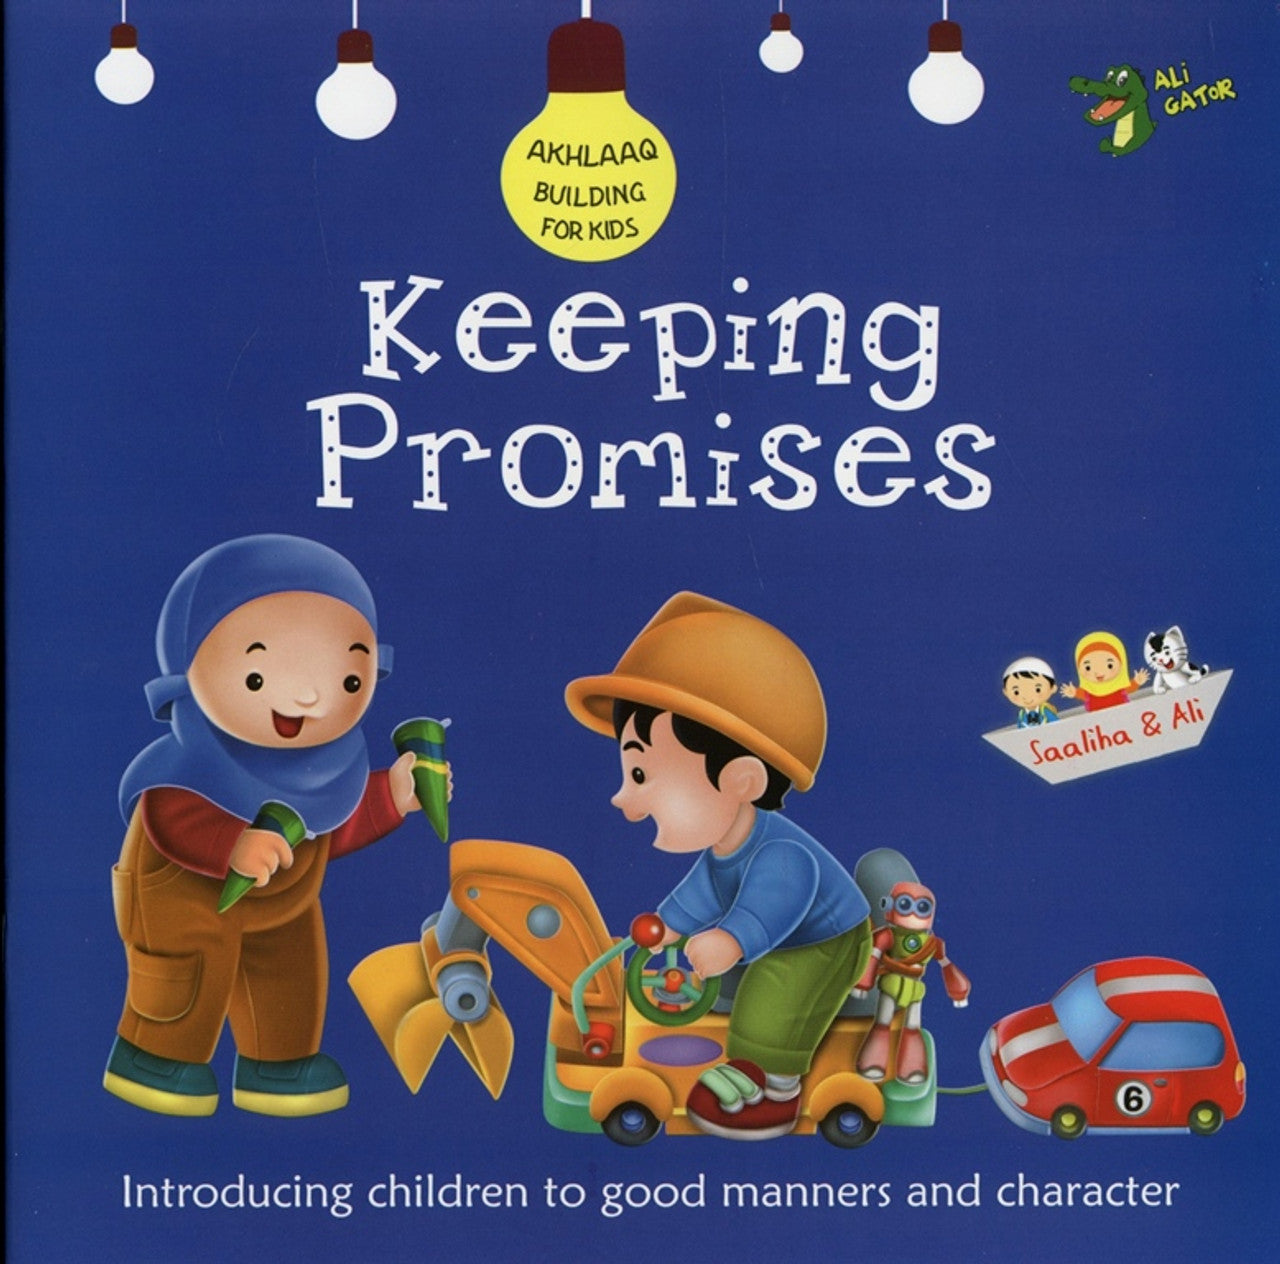 Keeping Promises - Akhlaaq Building for Kids